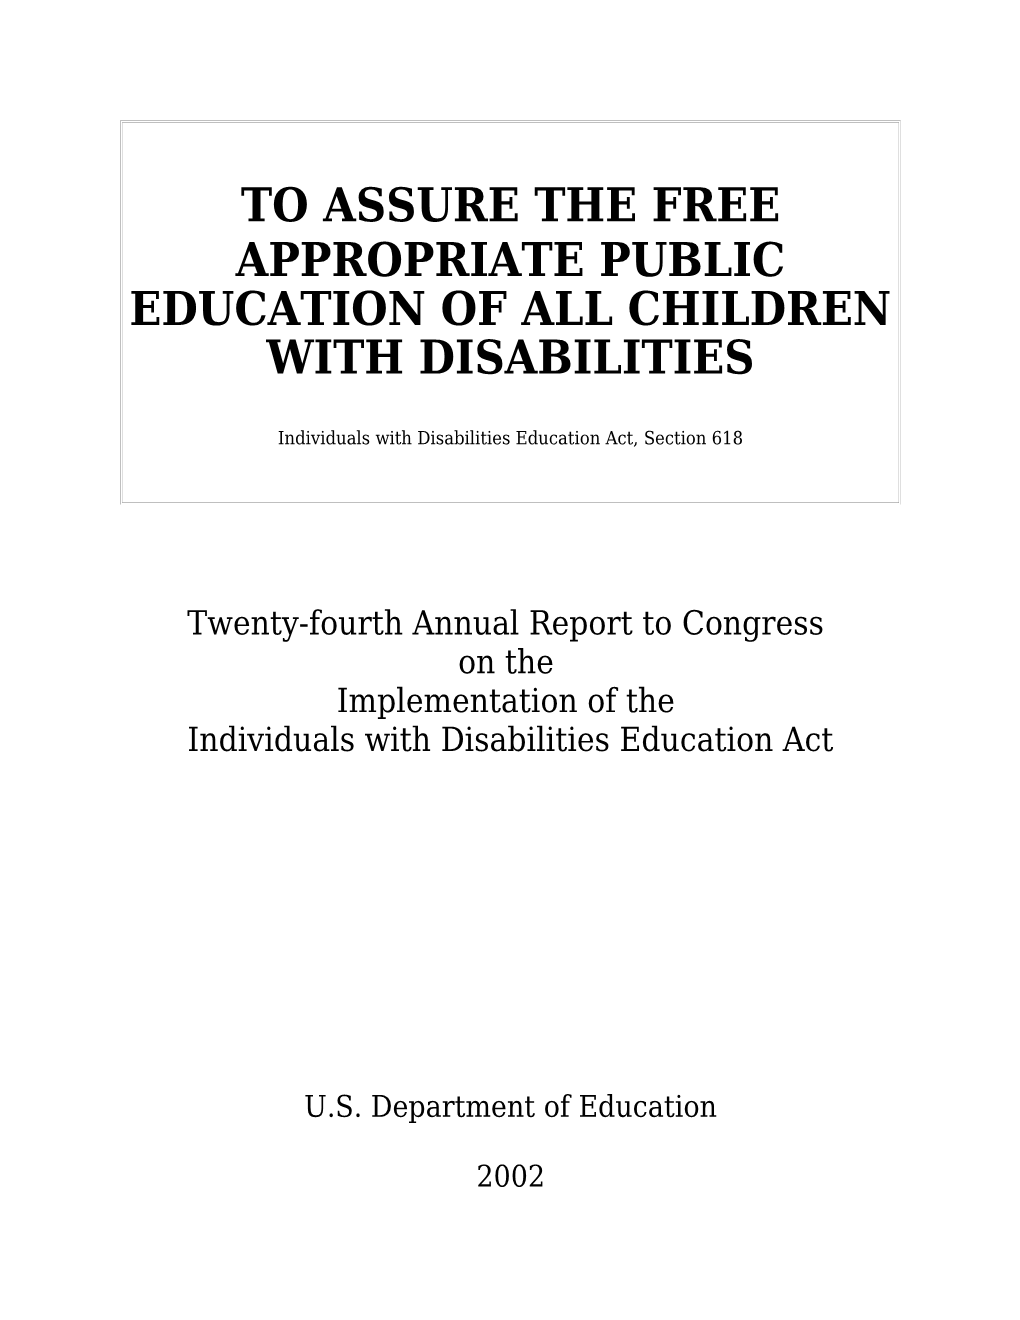 Appropriate Public Education of All Children with Disabilities